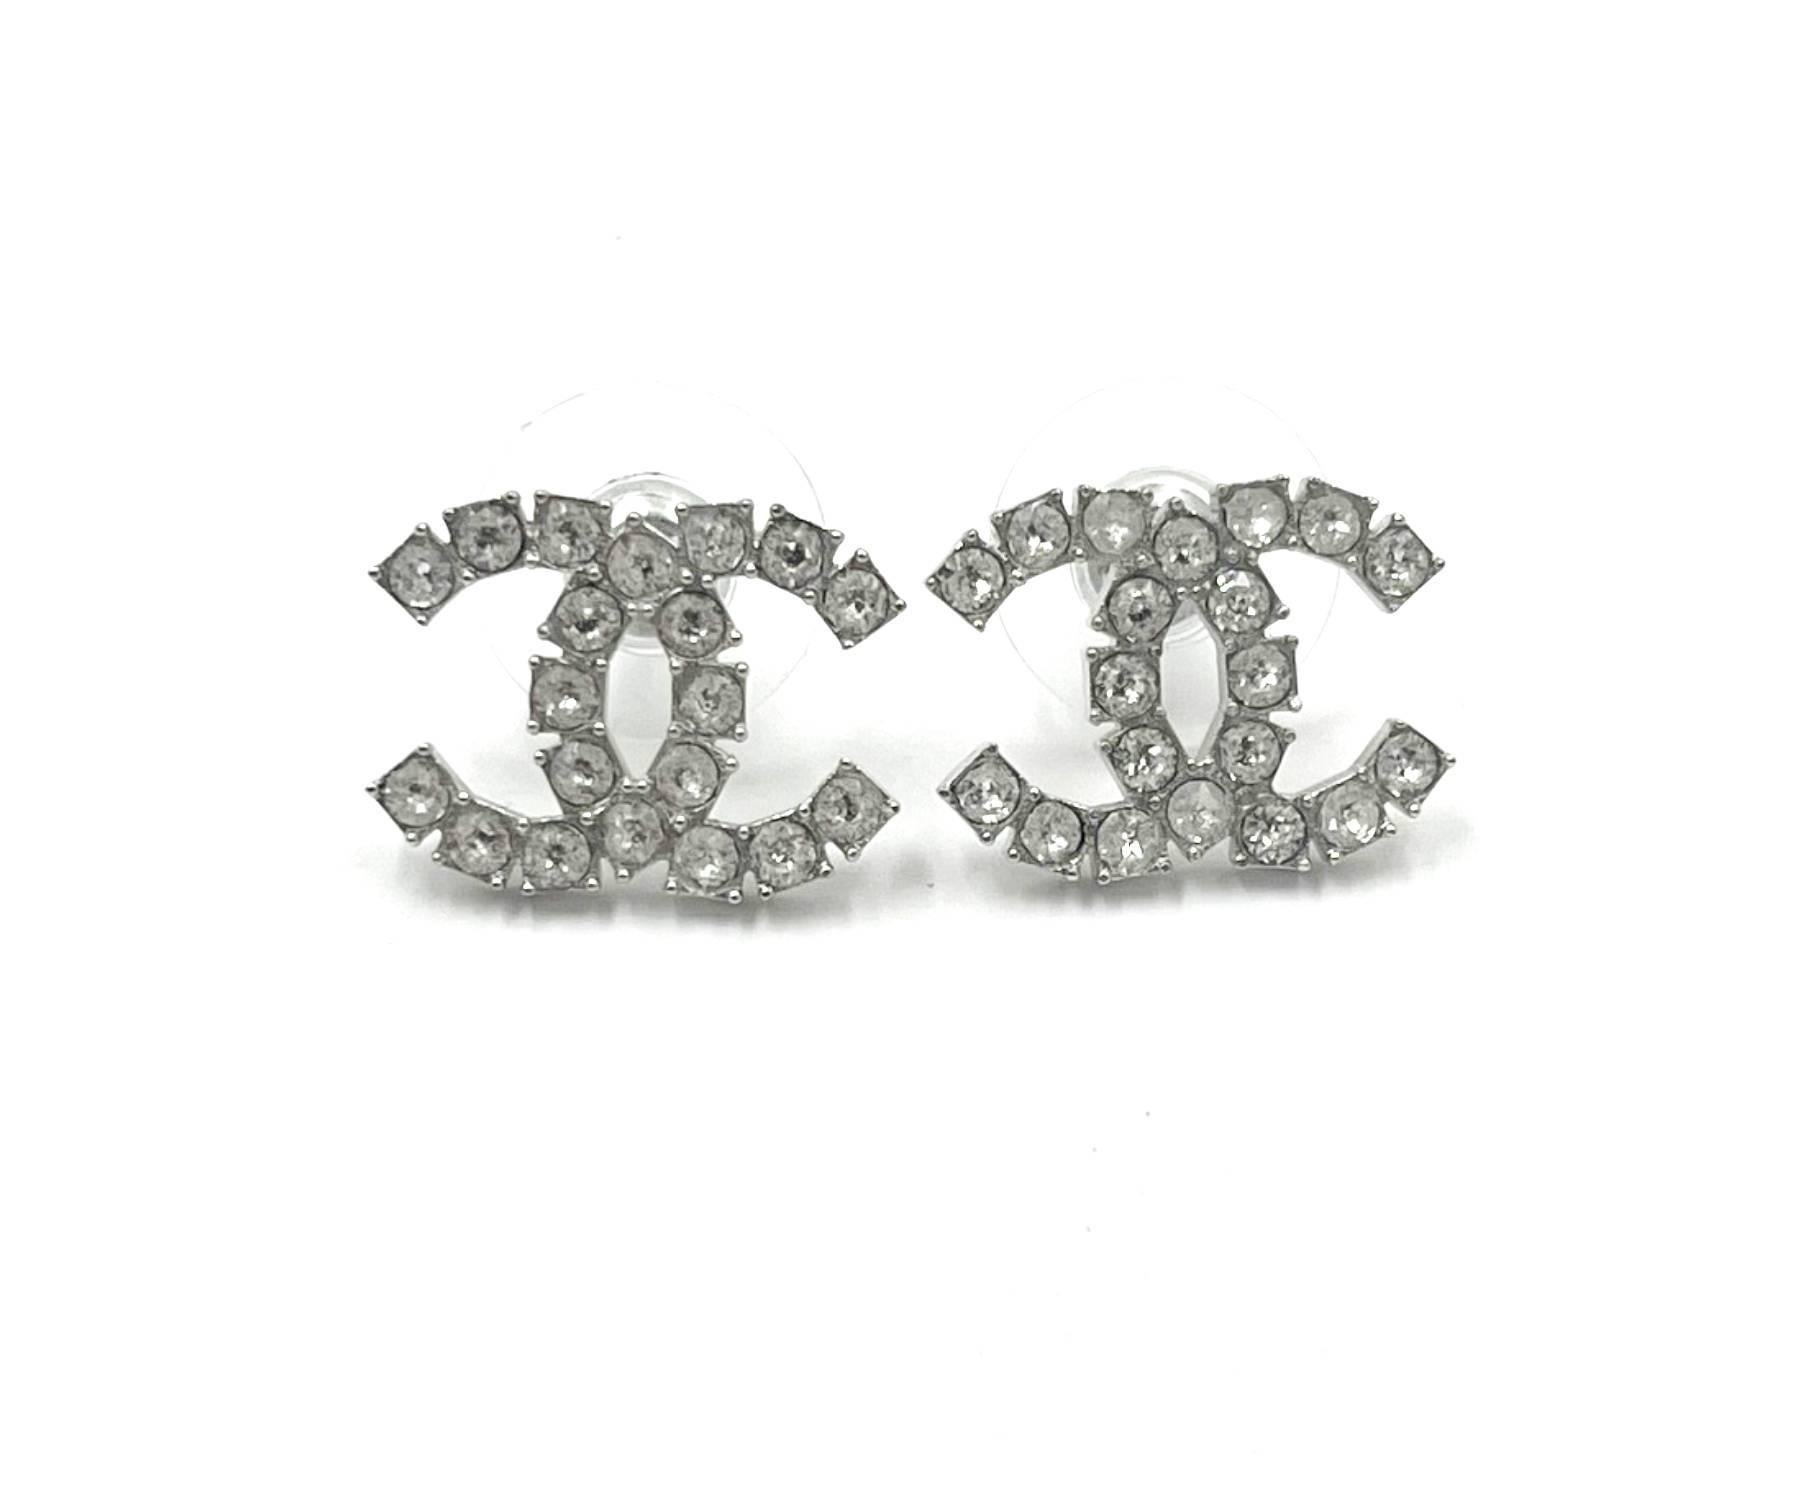 Chanel Brand New Silver CC Rocky Crystal Reissued Piercing Earrings

*Marked 19
*Made in Italy
*Comes with original box, pouch and booklet
*Brand New

-It's approximately 0.6